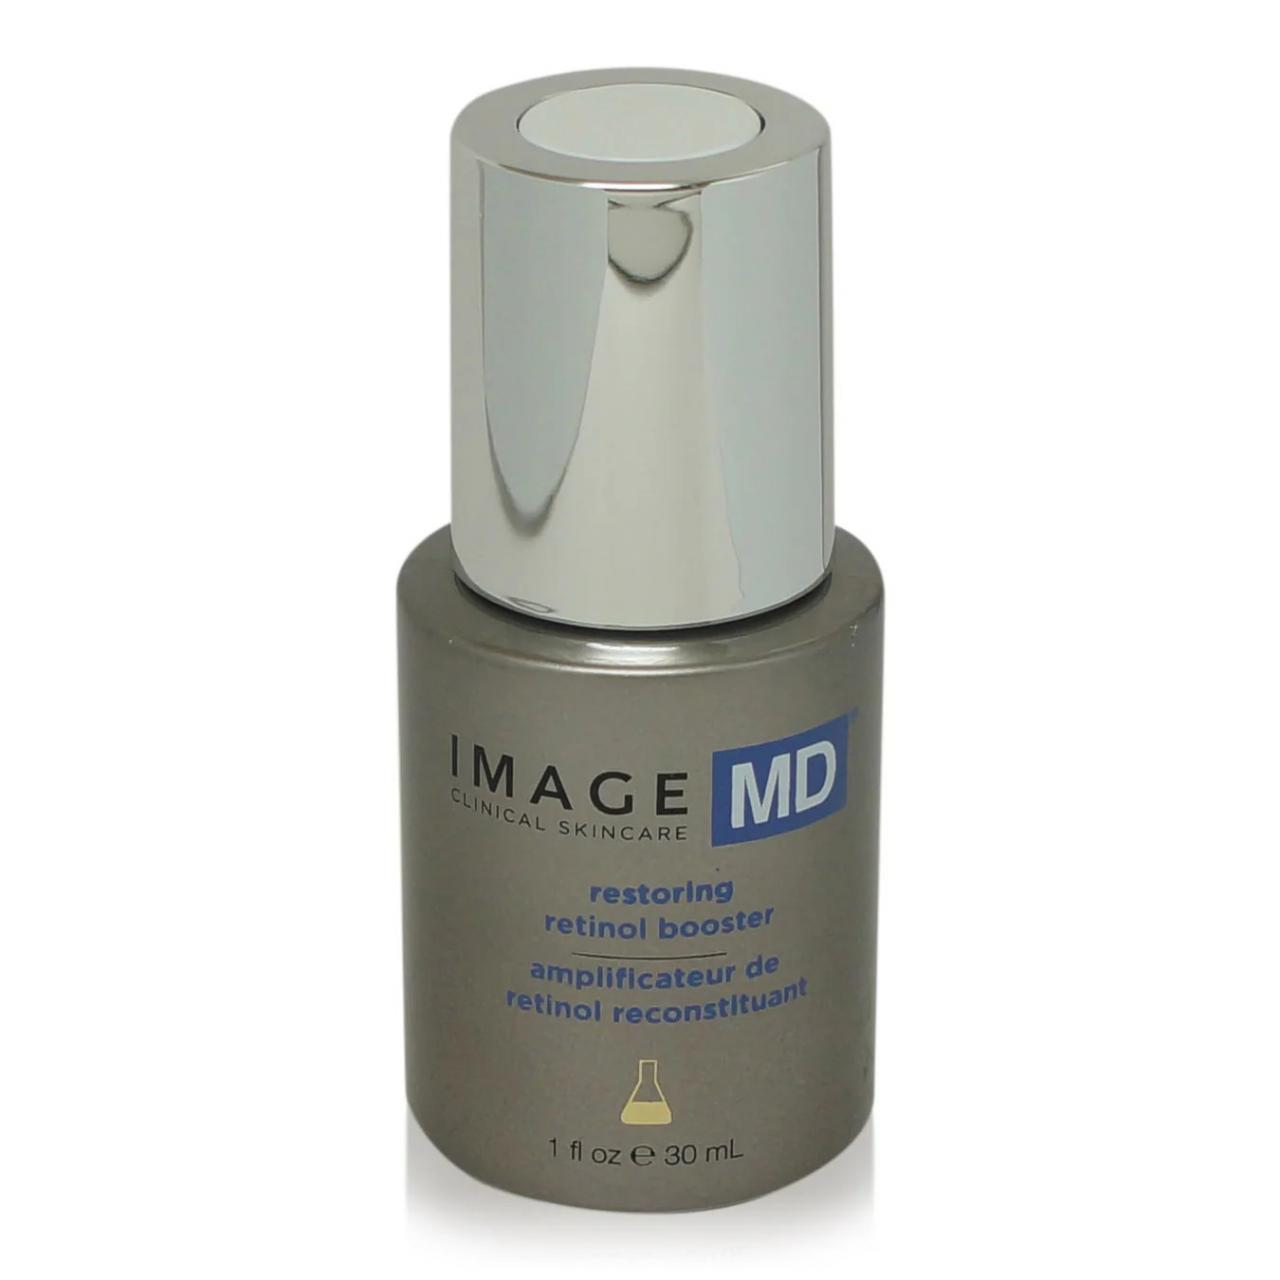 Image MD Skincare, A Revolutionary Approach to Personalized Skincare